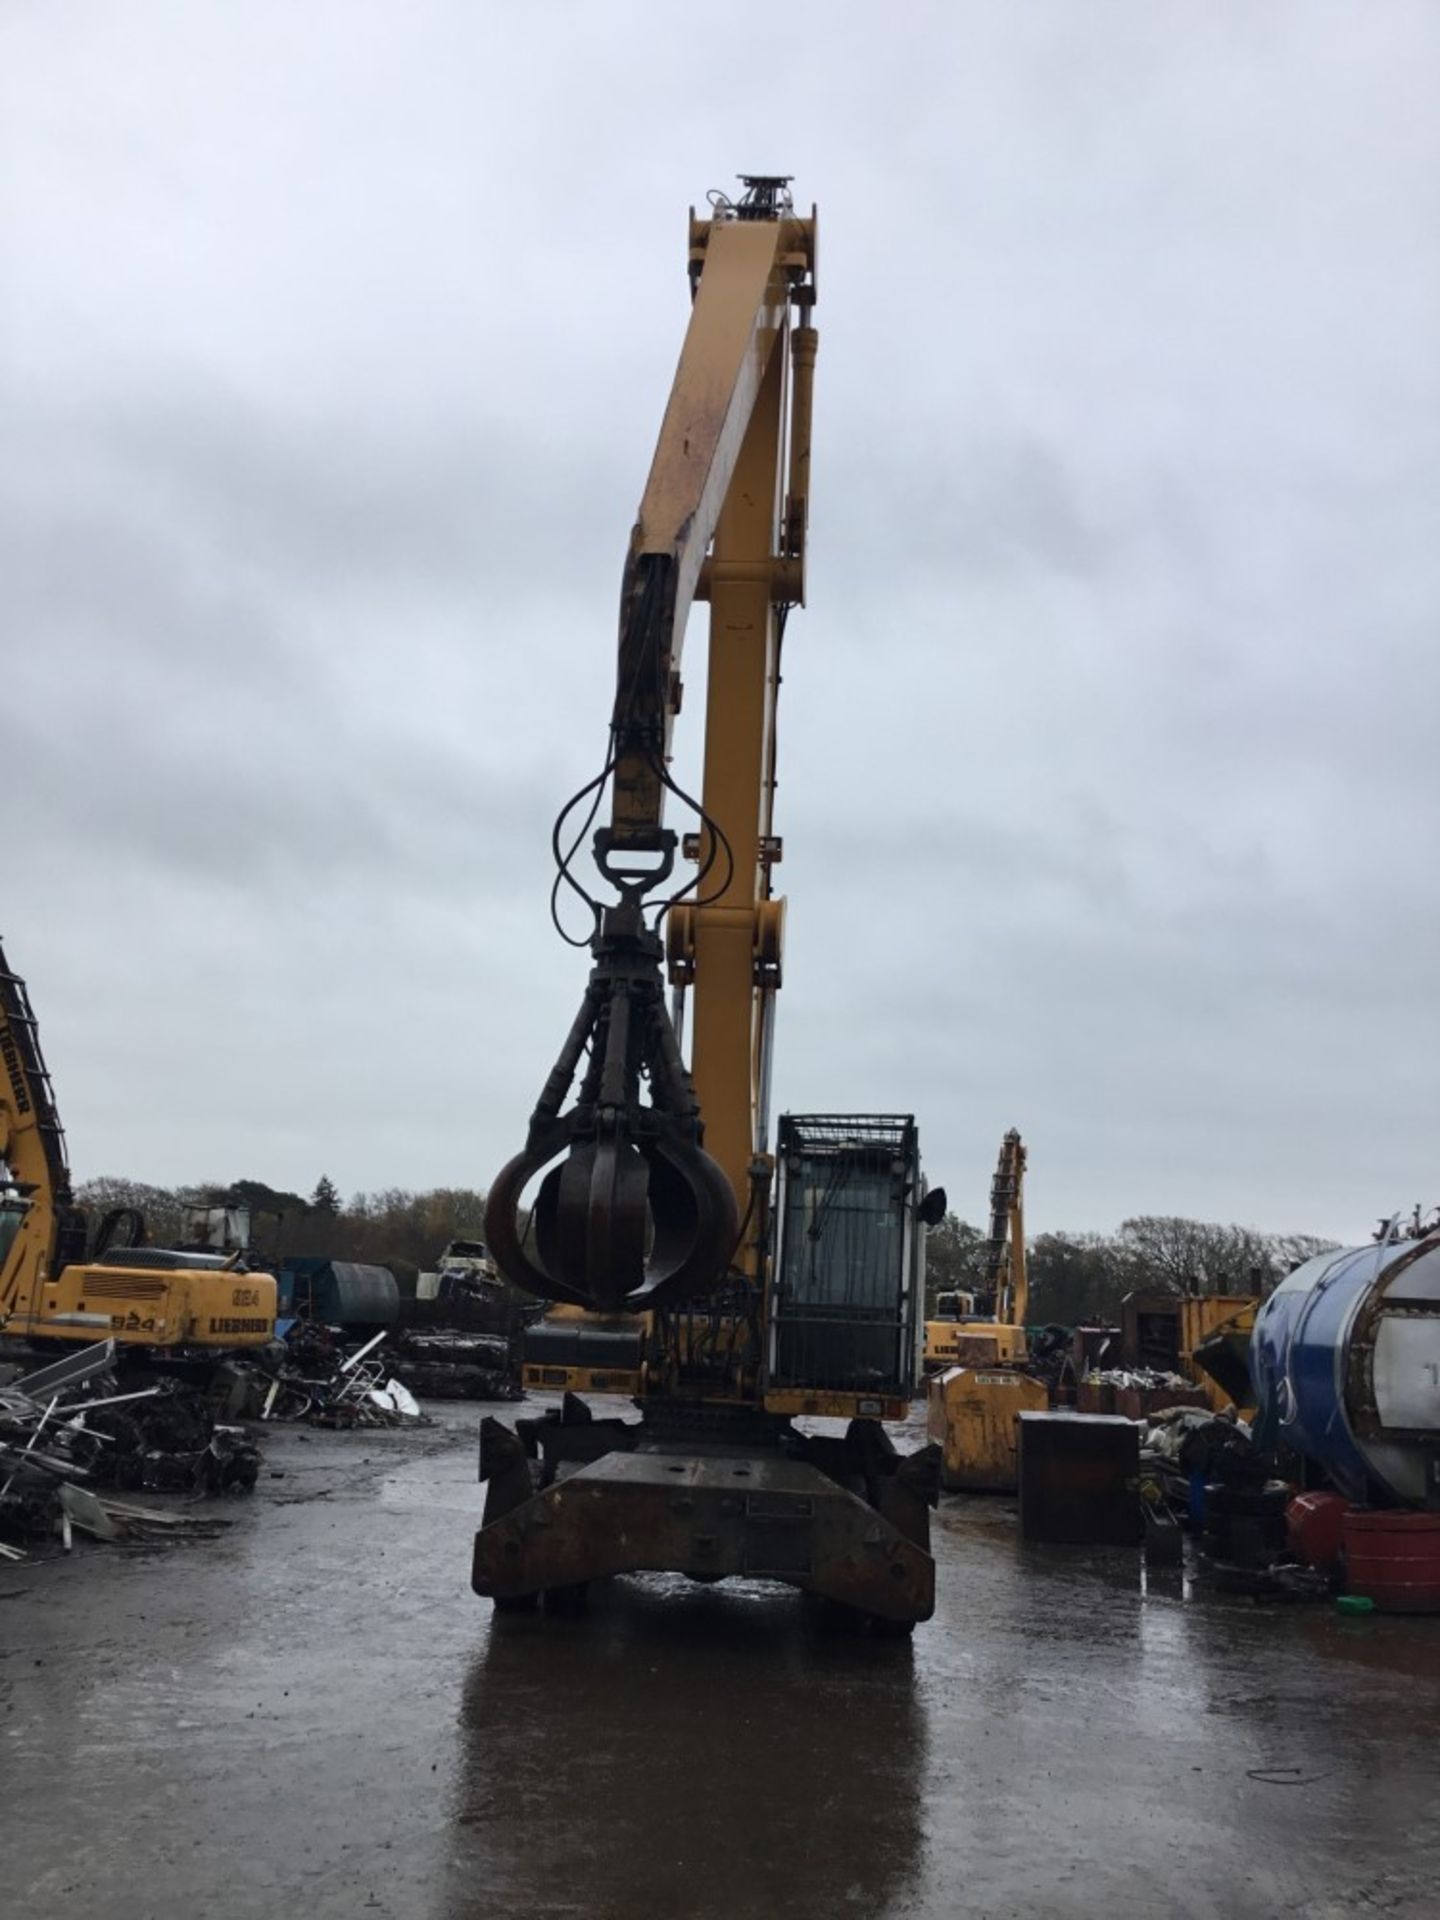 2010 LIEBHERR 934 (LOCATION ANNAN) 15340 HOURS (RING FOR COLLECTION DETAILS) [+ VAT] - Image 2 of 4